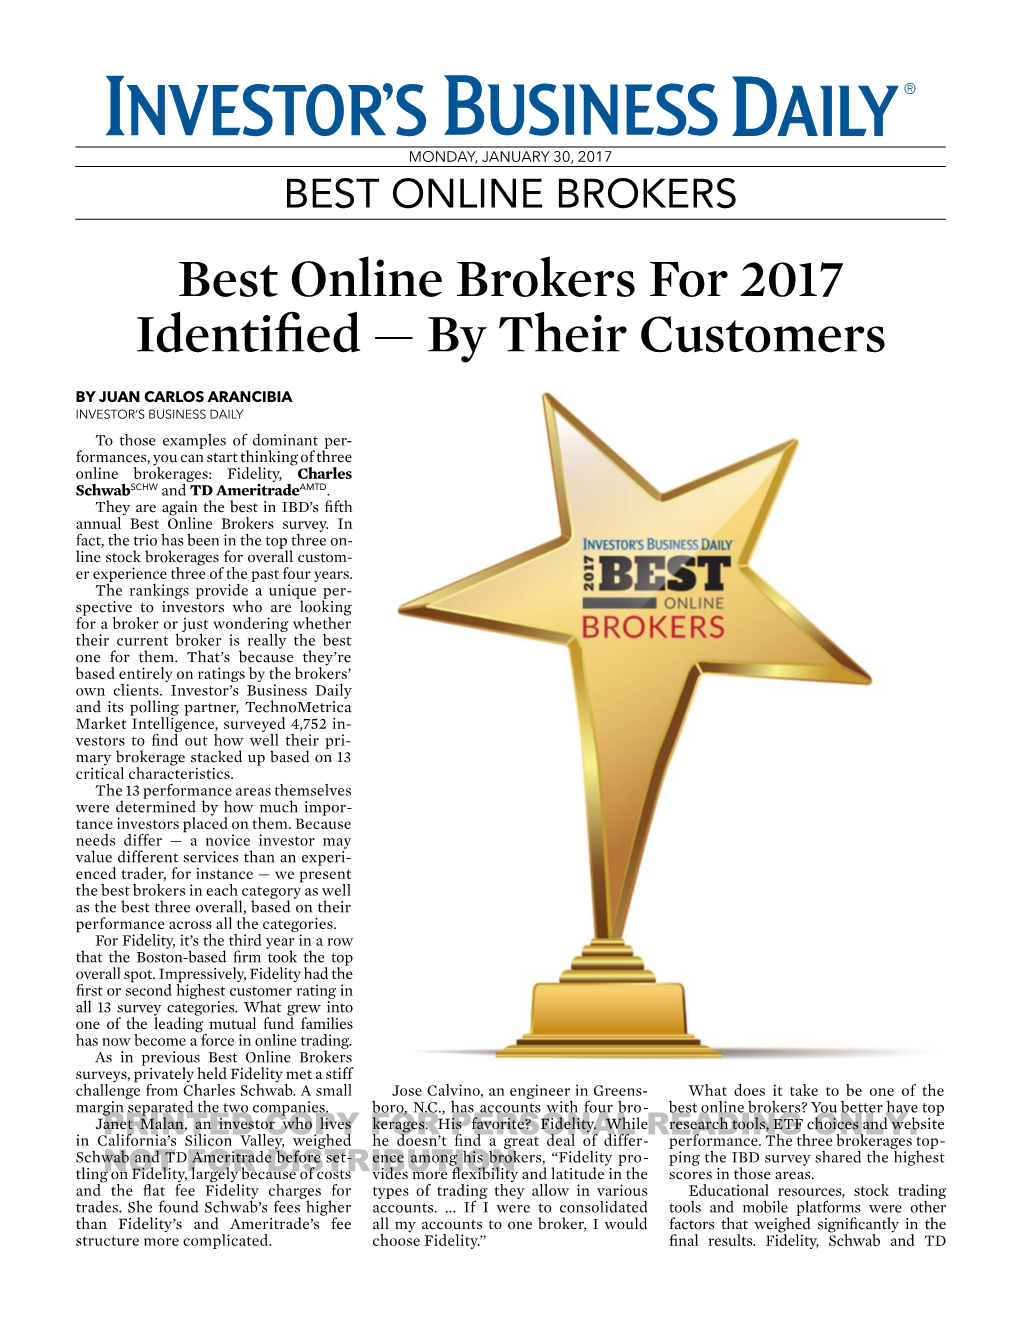 Best Online Brokers for 2017 Identified — by Their Customers